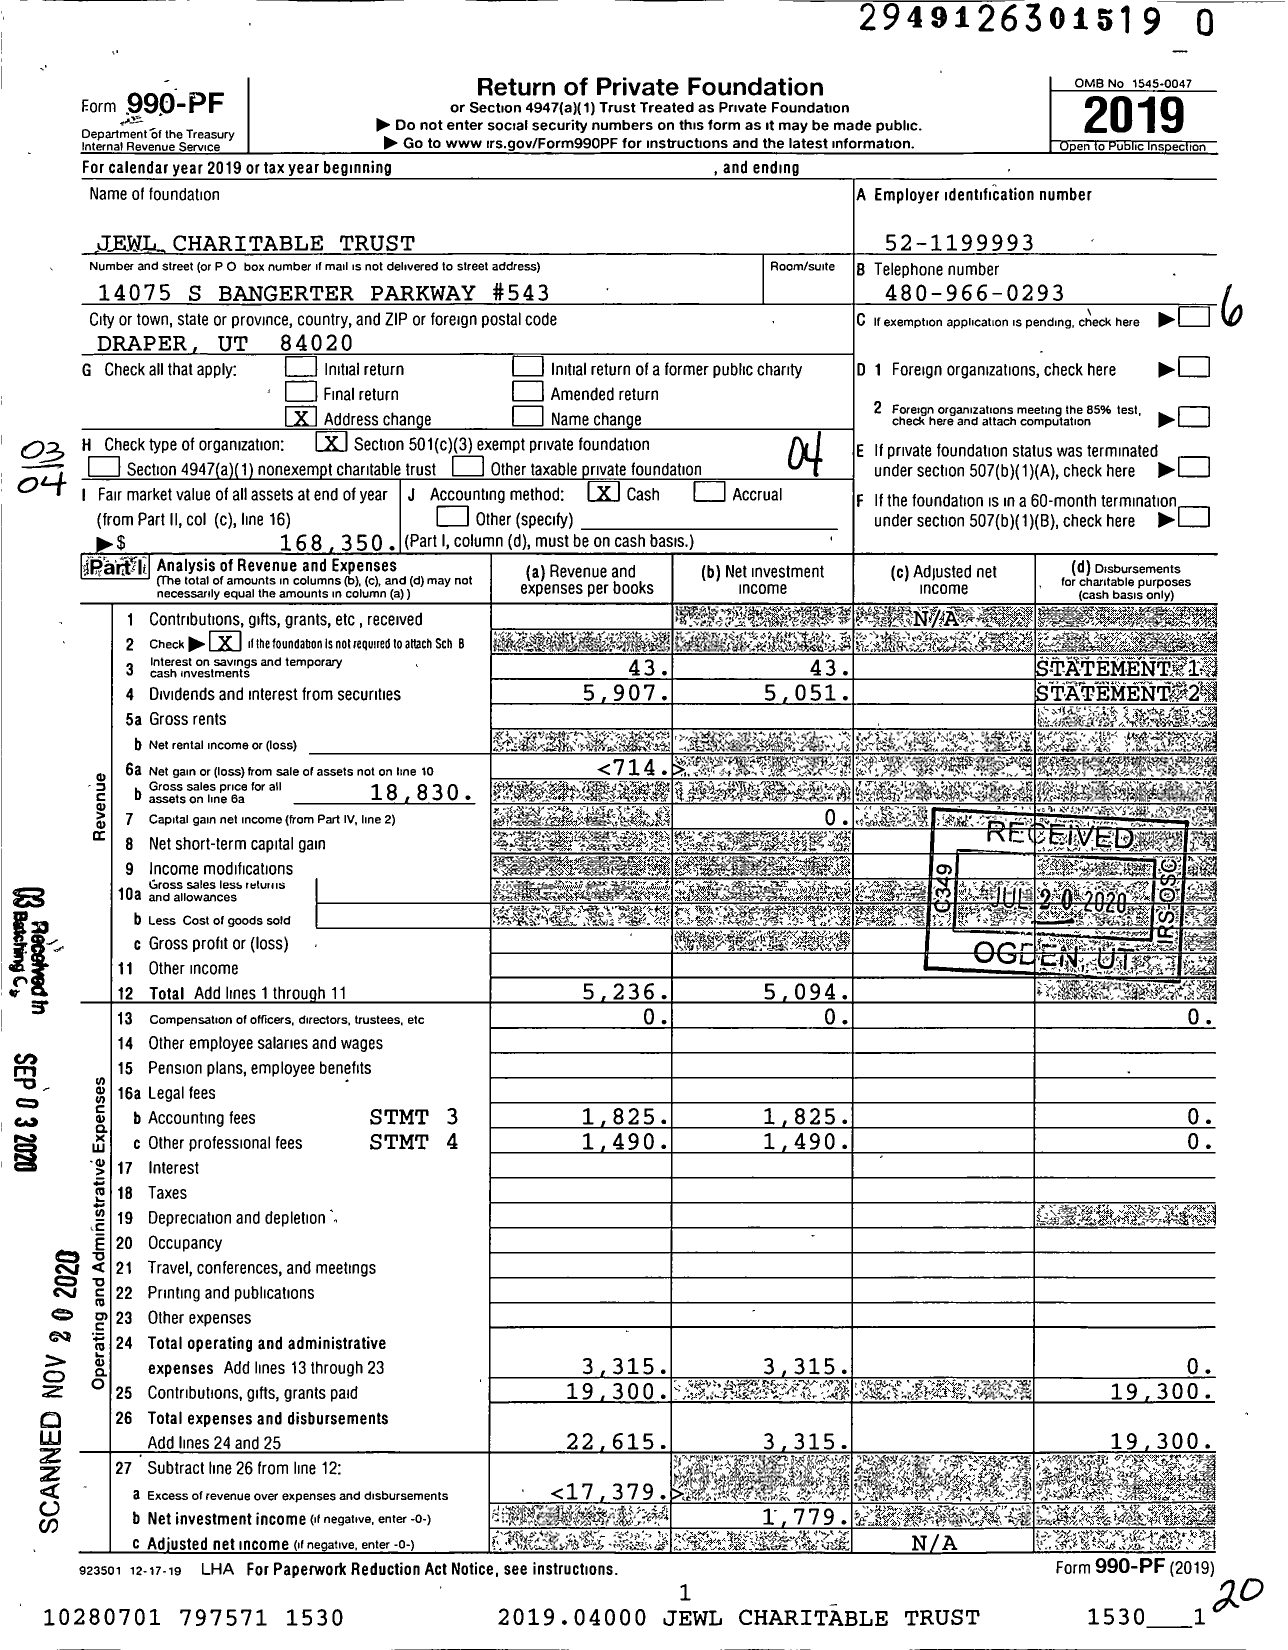 Image of first page of 2019 Form 990PF for Jewl Charitable Trust